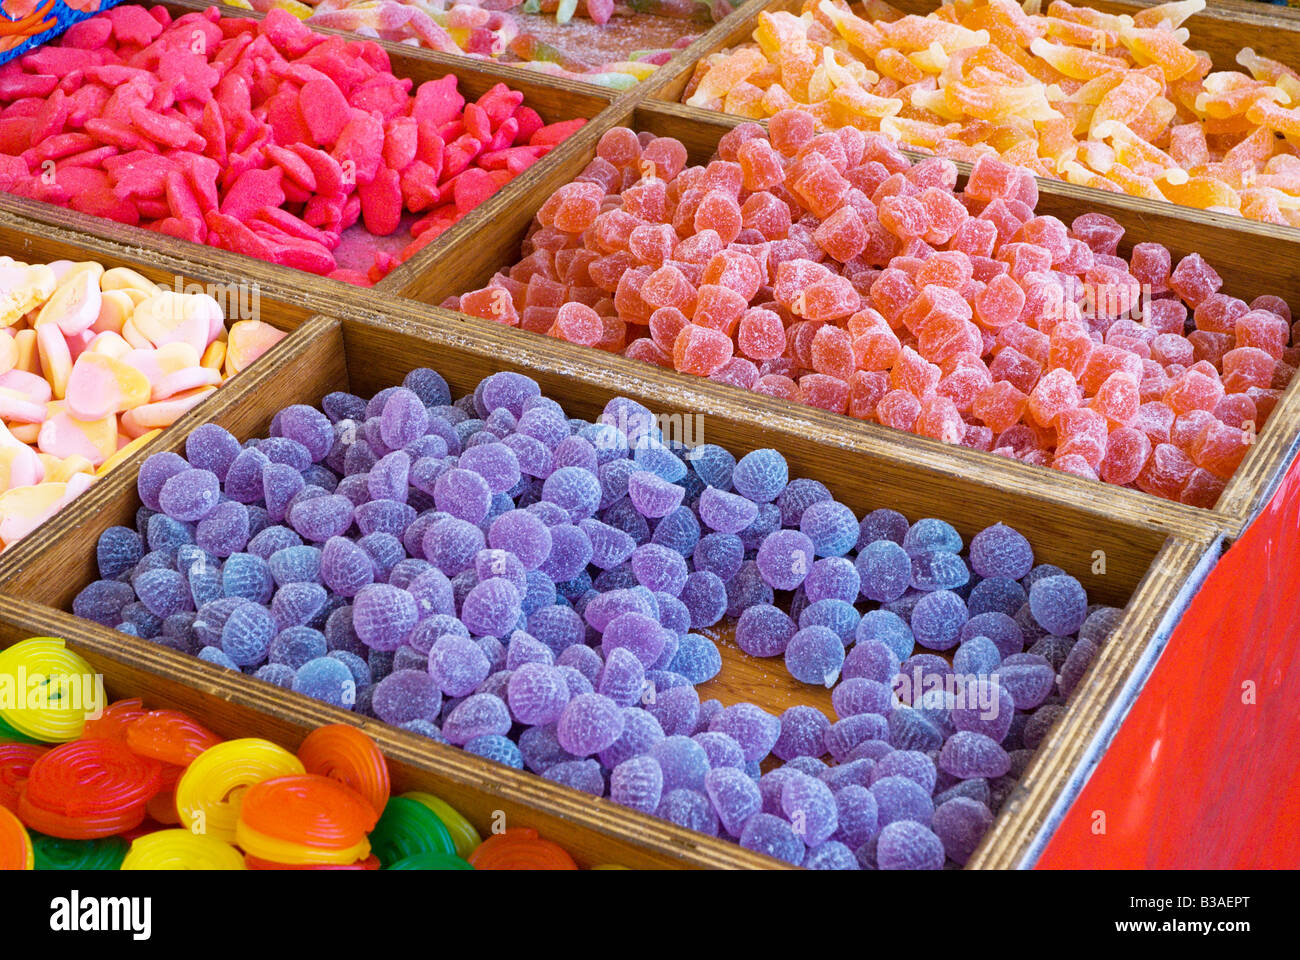 Bright candies or lollies for sale at the French Market. Stock Photo